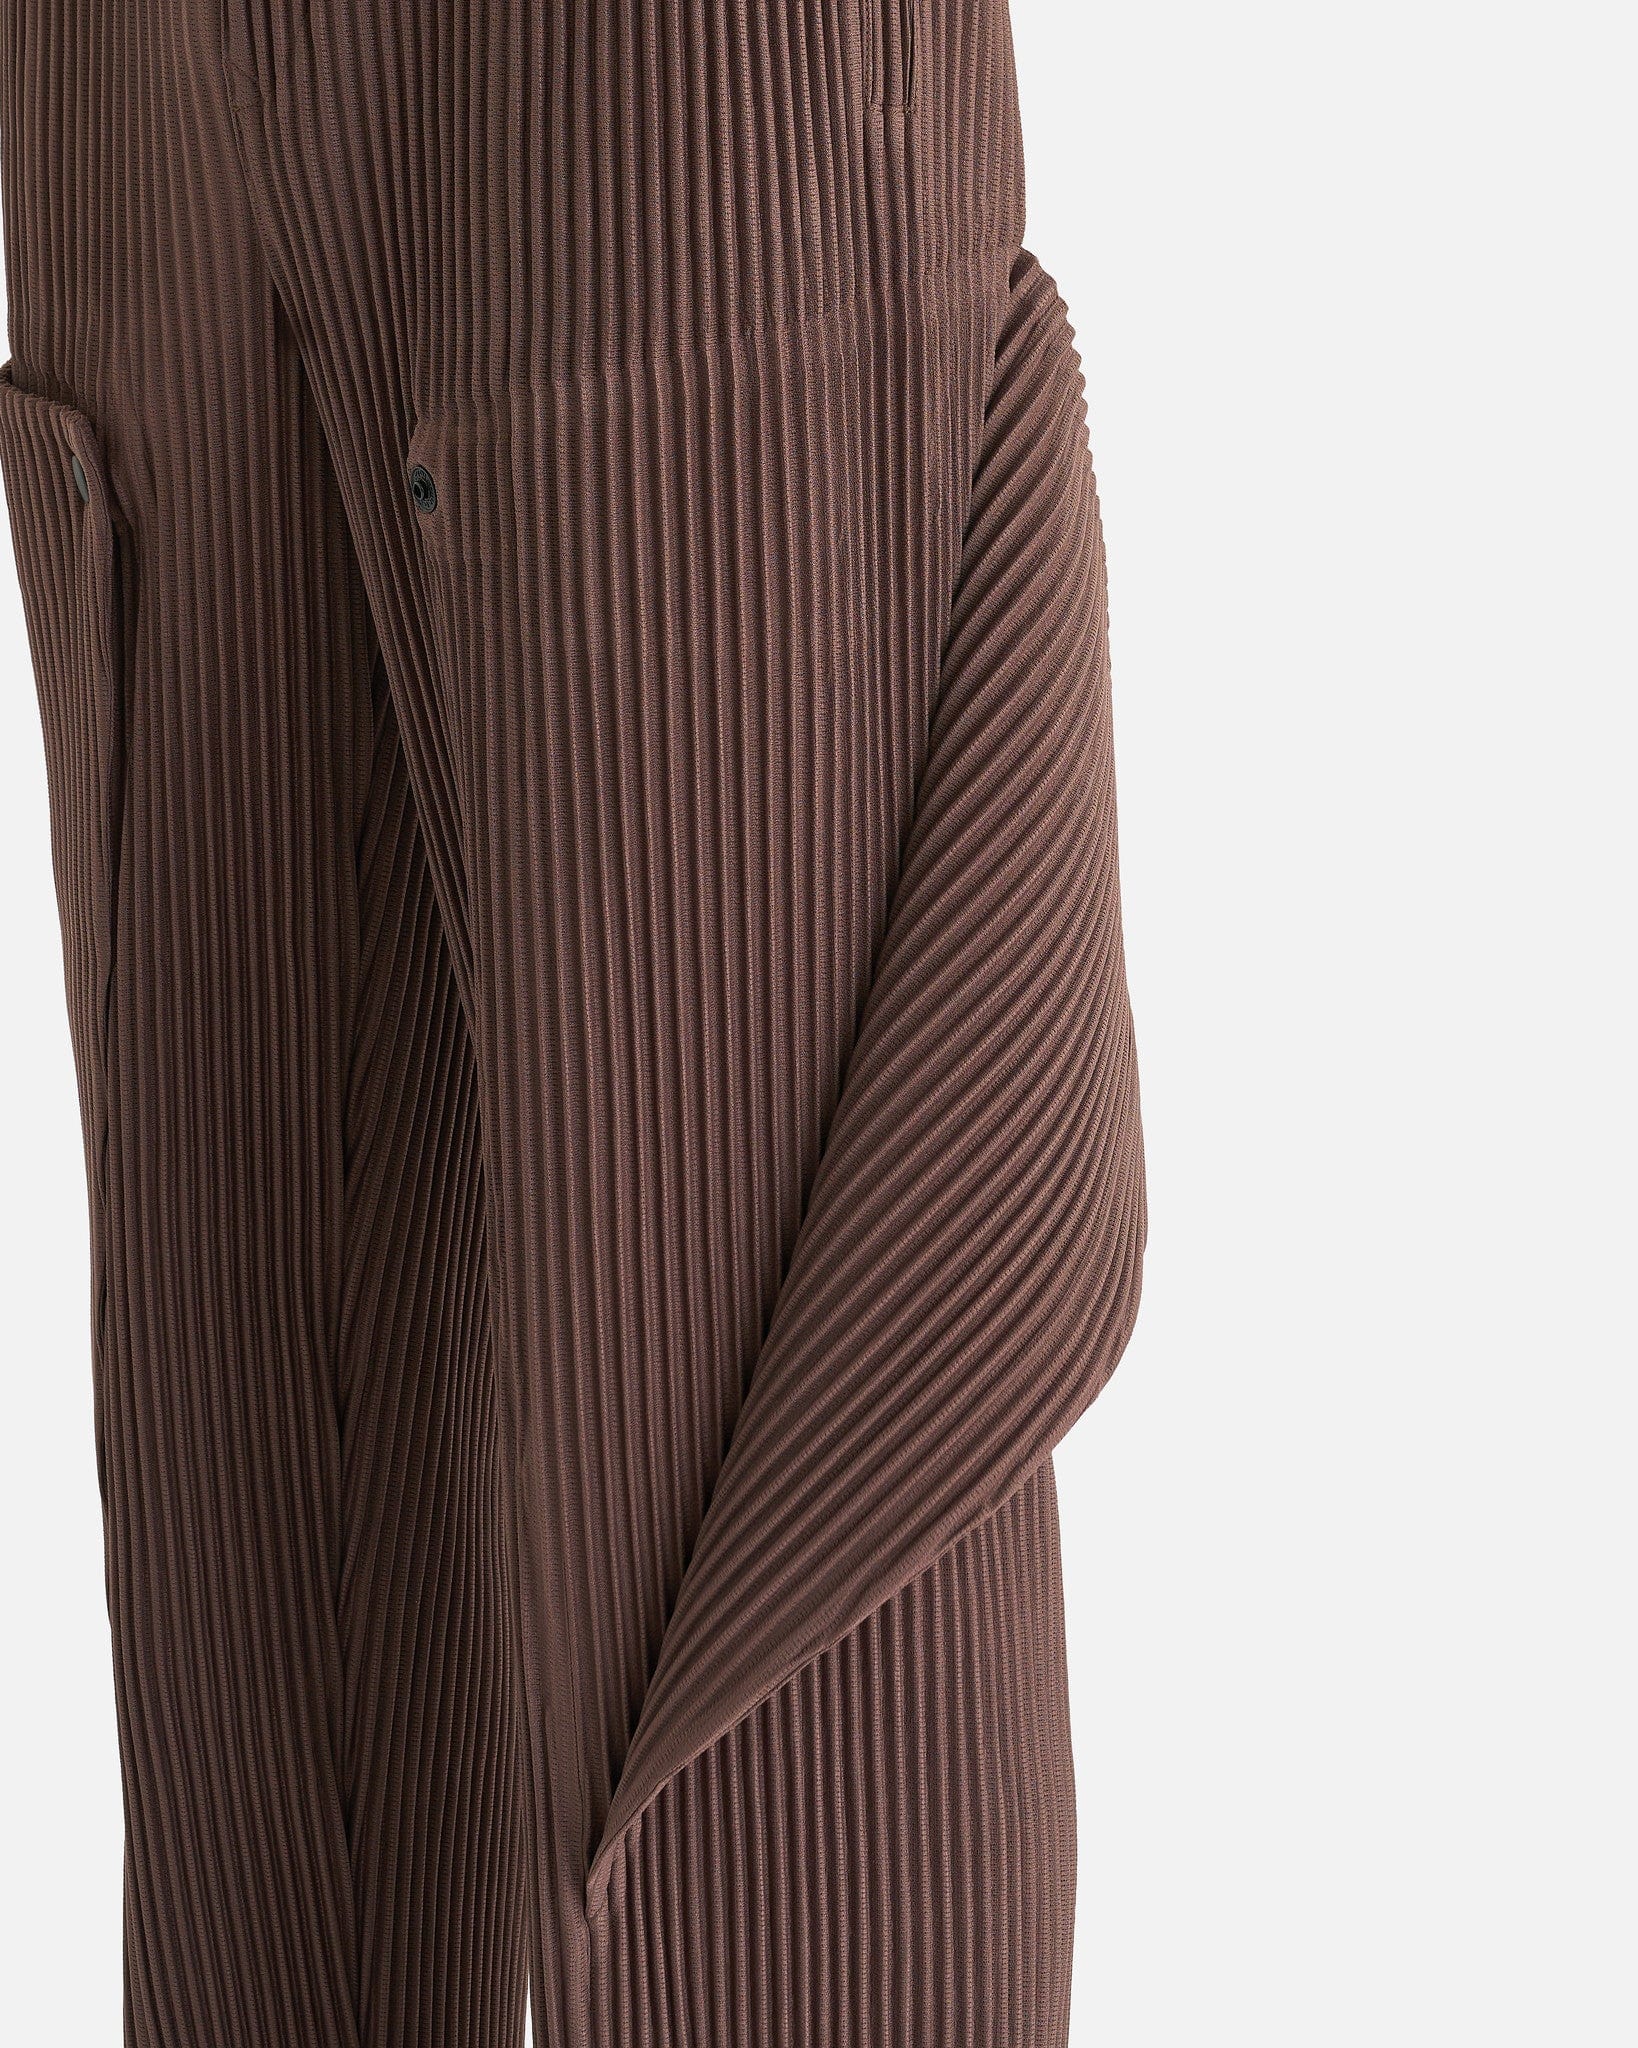 Homme Plissé Issey Miyake Men's Pants Unfold Pleated Trousers in Soil Brown